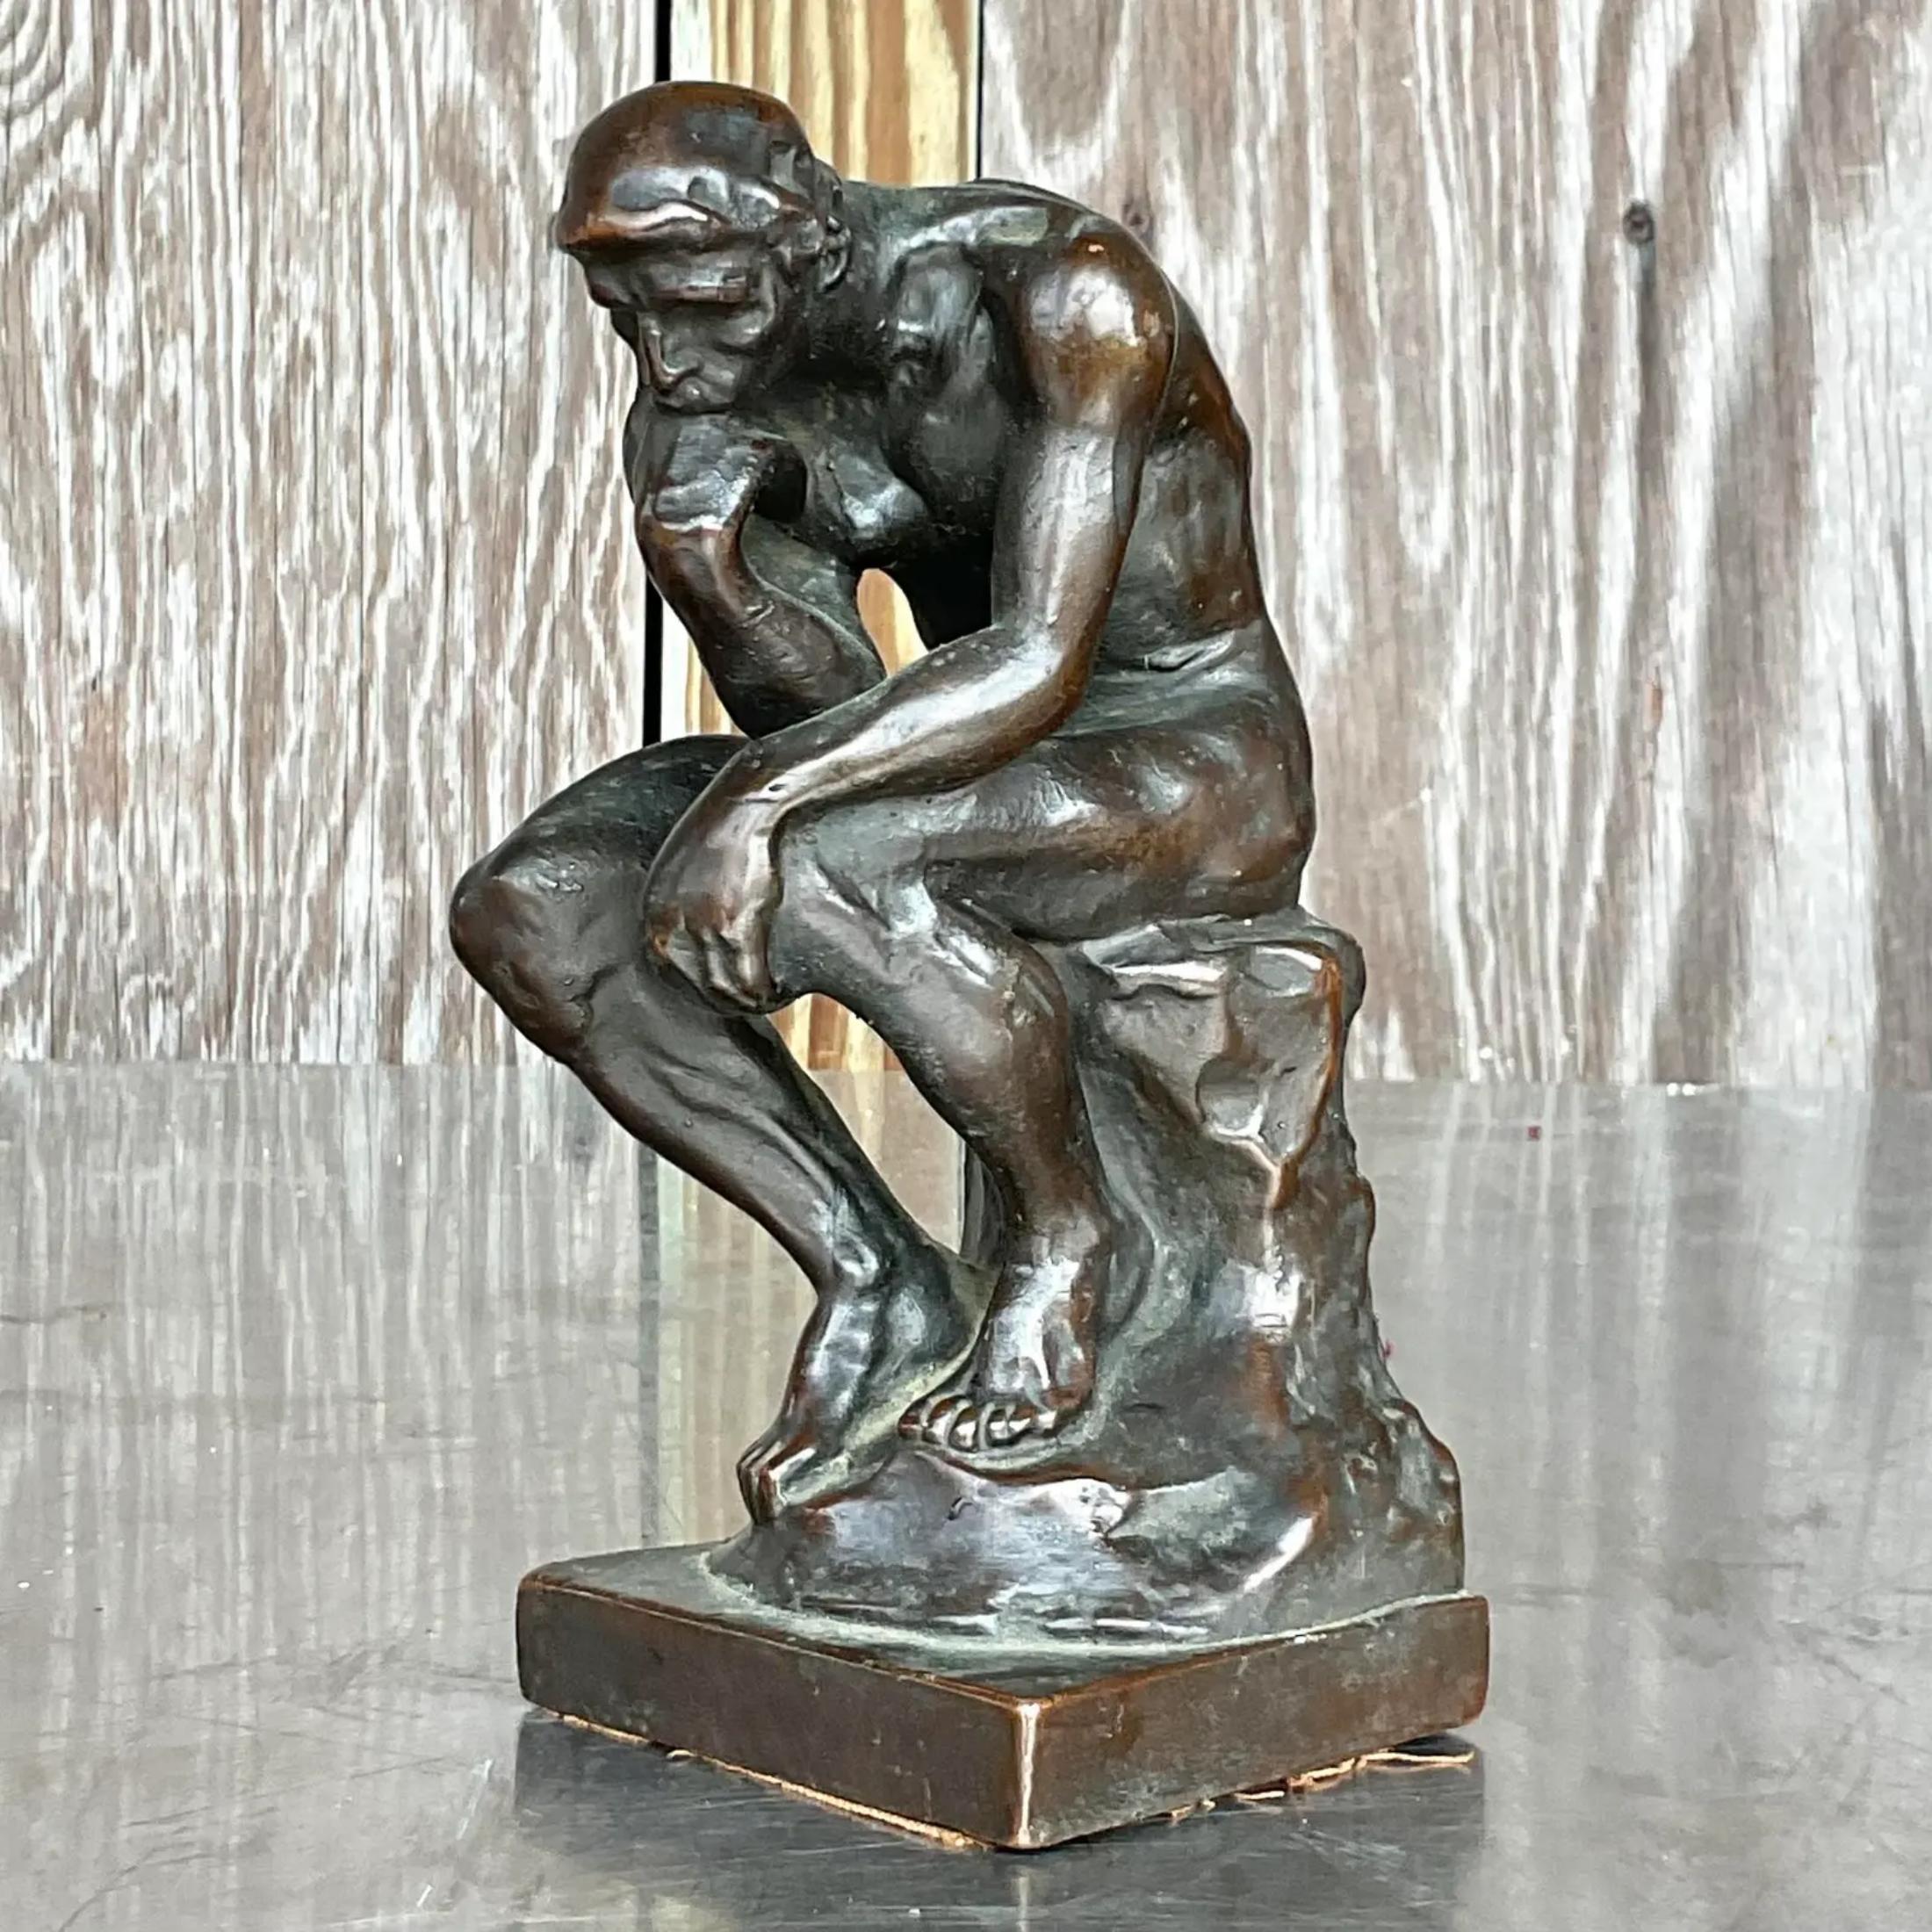 Italian Vintage Regency Patinated Plaster Agusta Rodin “The Thinker” Bookends - a Pair For Sale